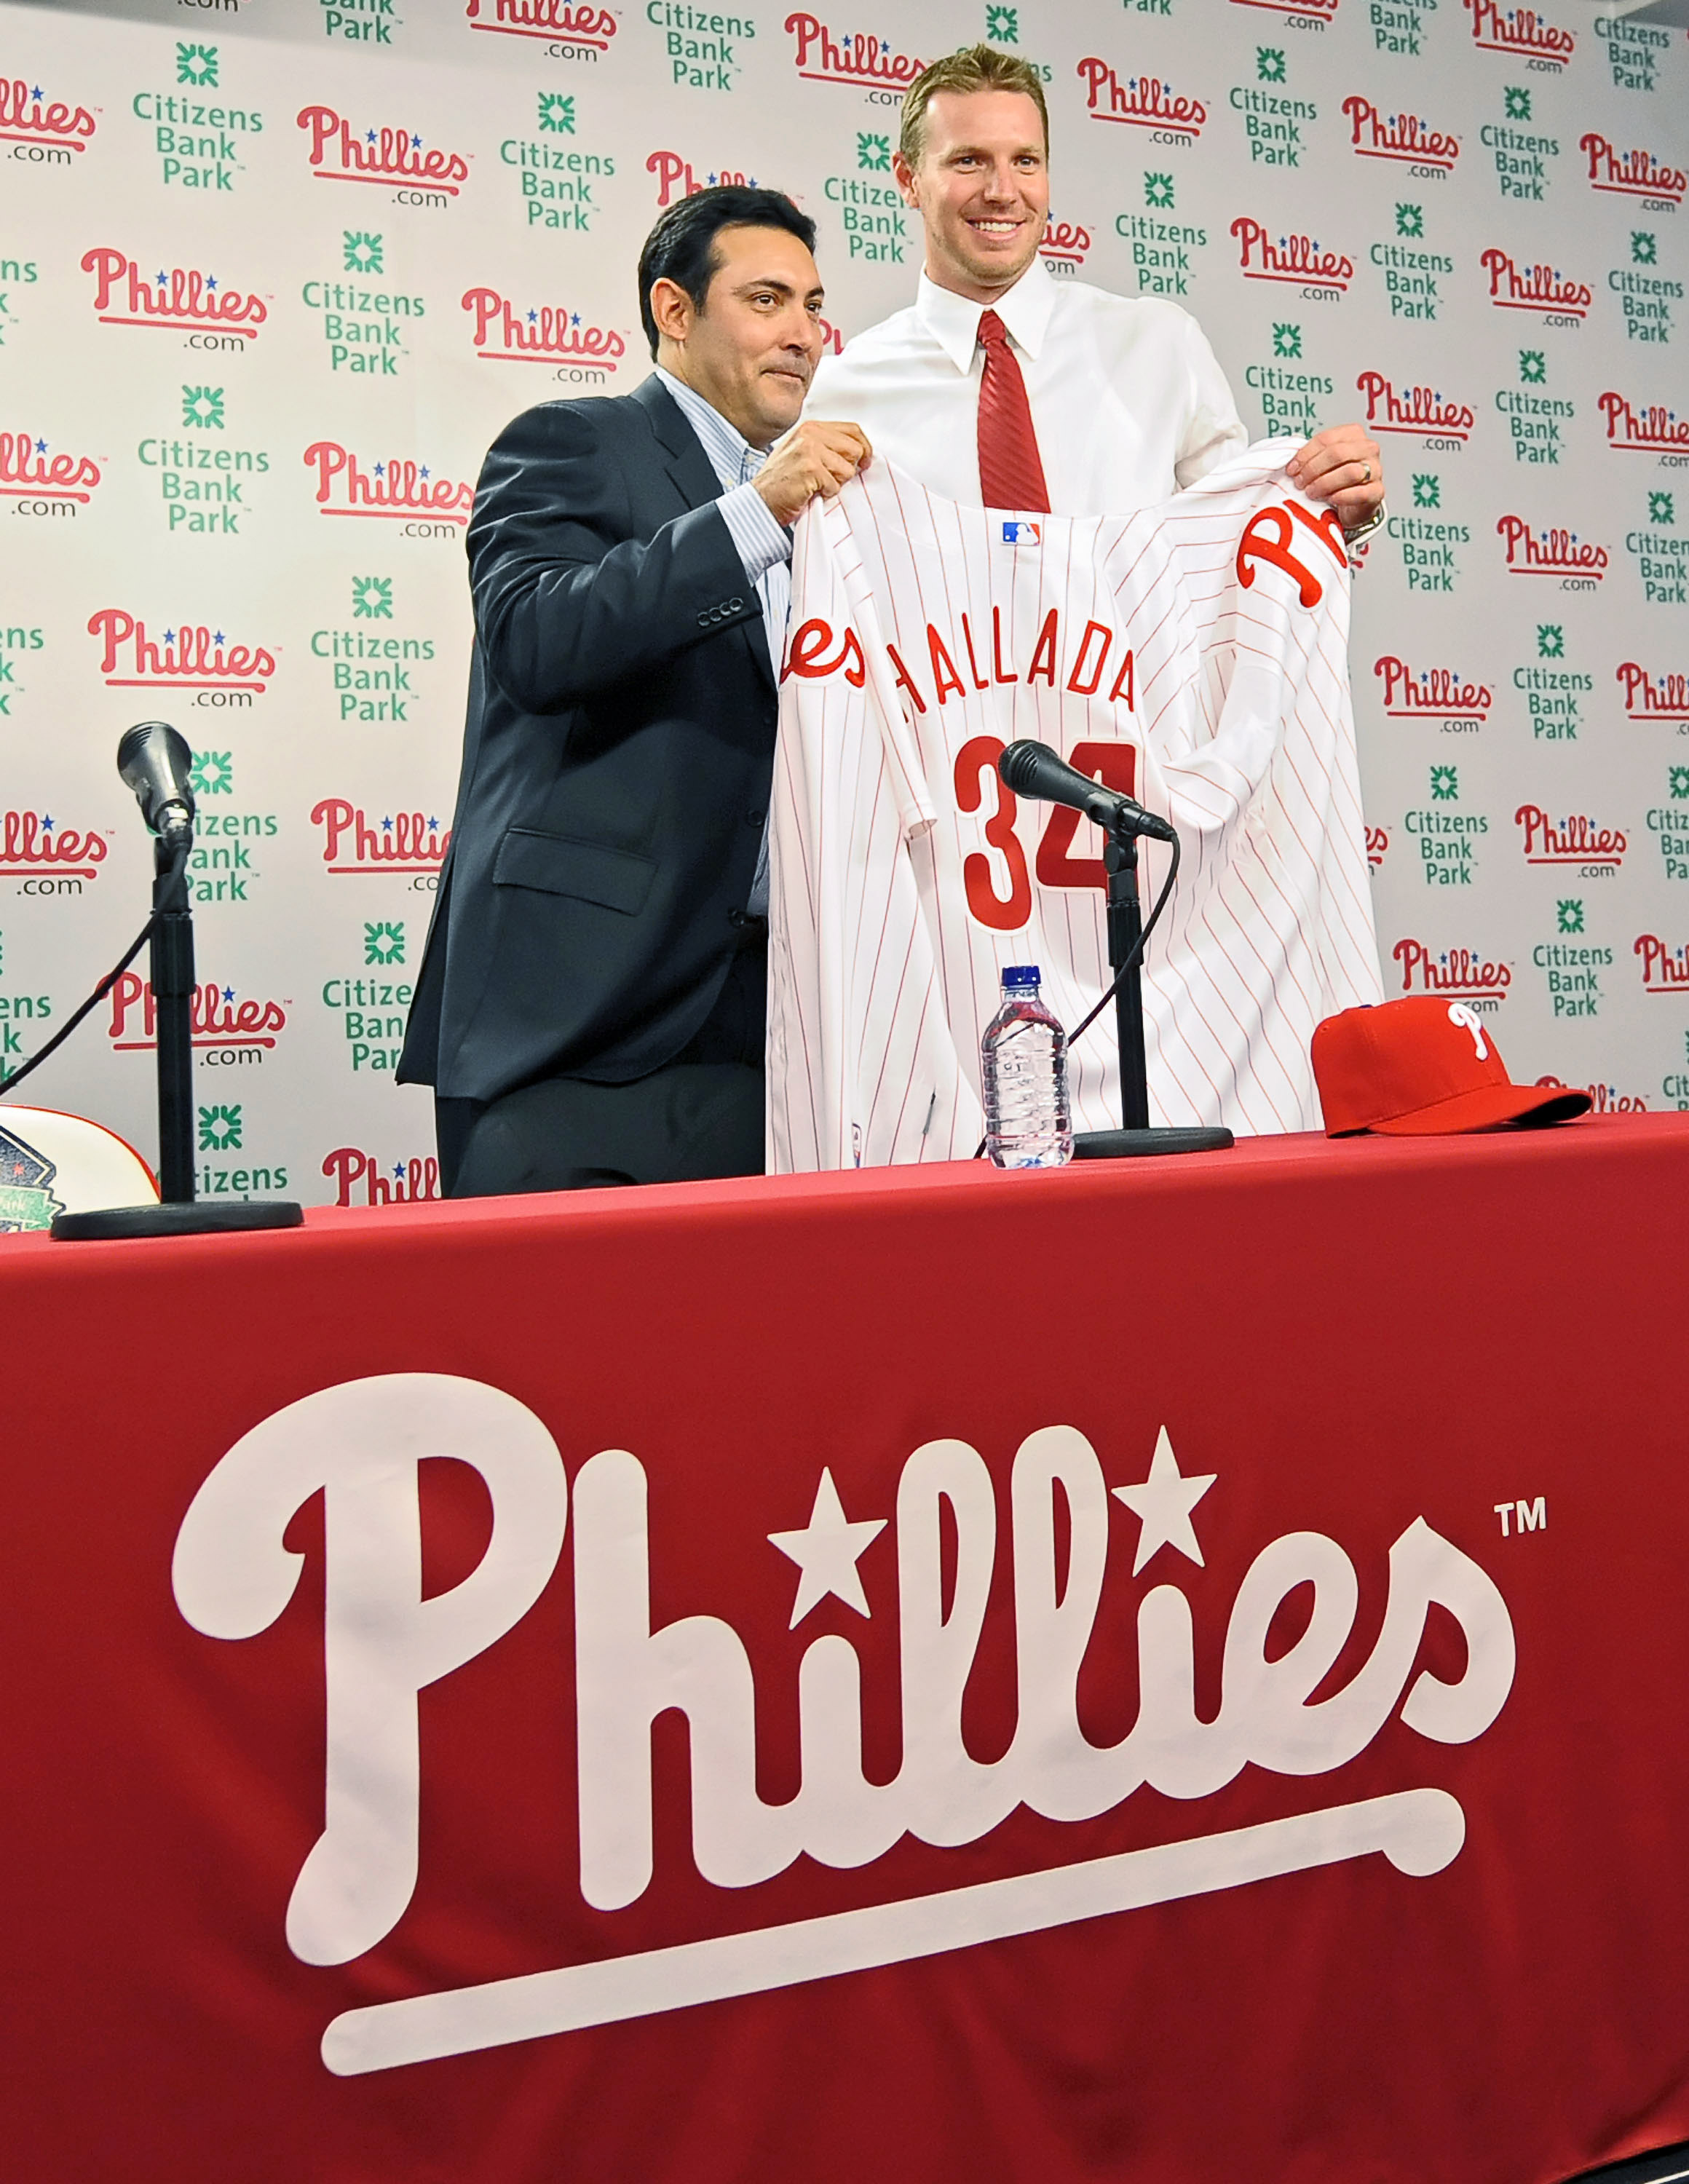 PHILADELPHIA - DECEMBER 16: Pitcher Roy Halladay of the Philadelphia Phillies and senior vice president and general manager Ruben Amaro, Jr. pose for a photograph on December 16, 2009 at Citizens Bank Park in Philadelphia, Pennsylvania. (Photo by Drew Hal